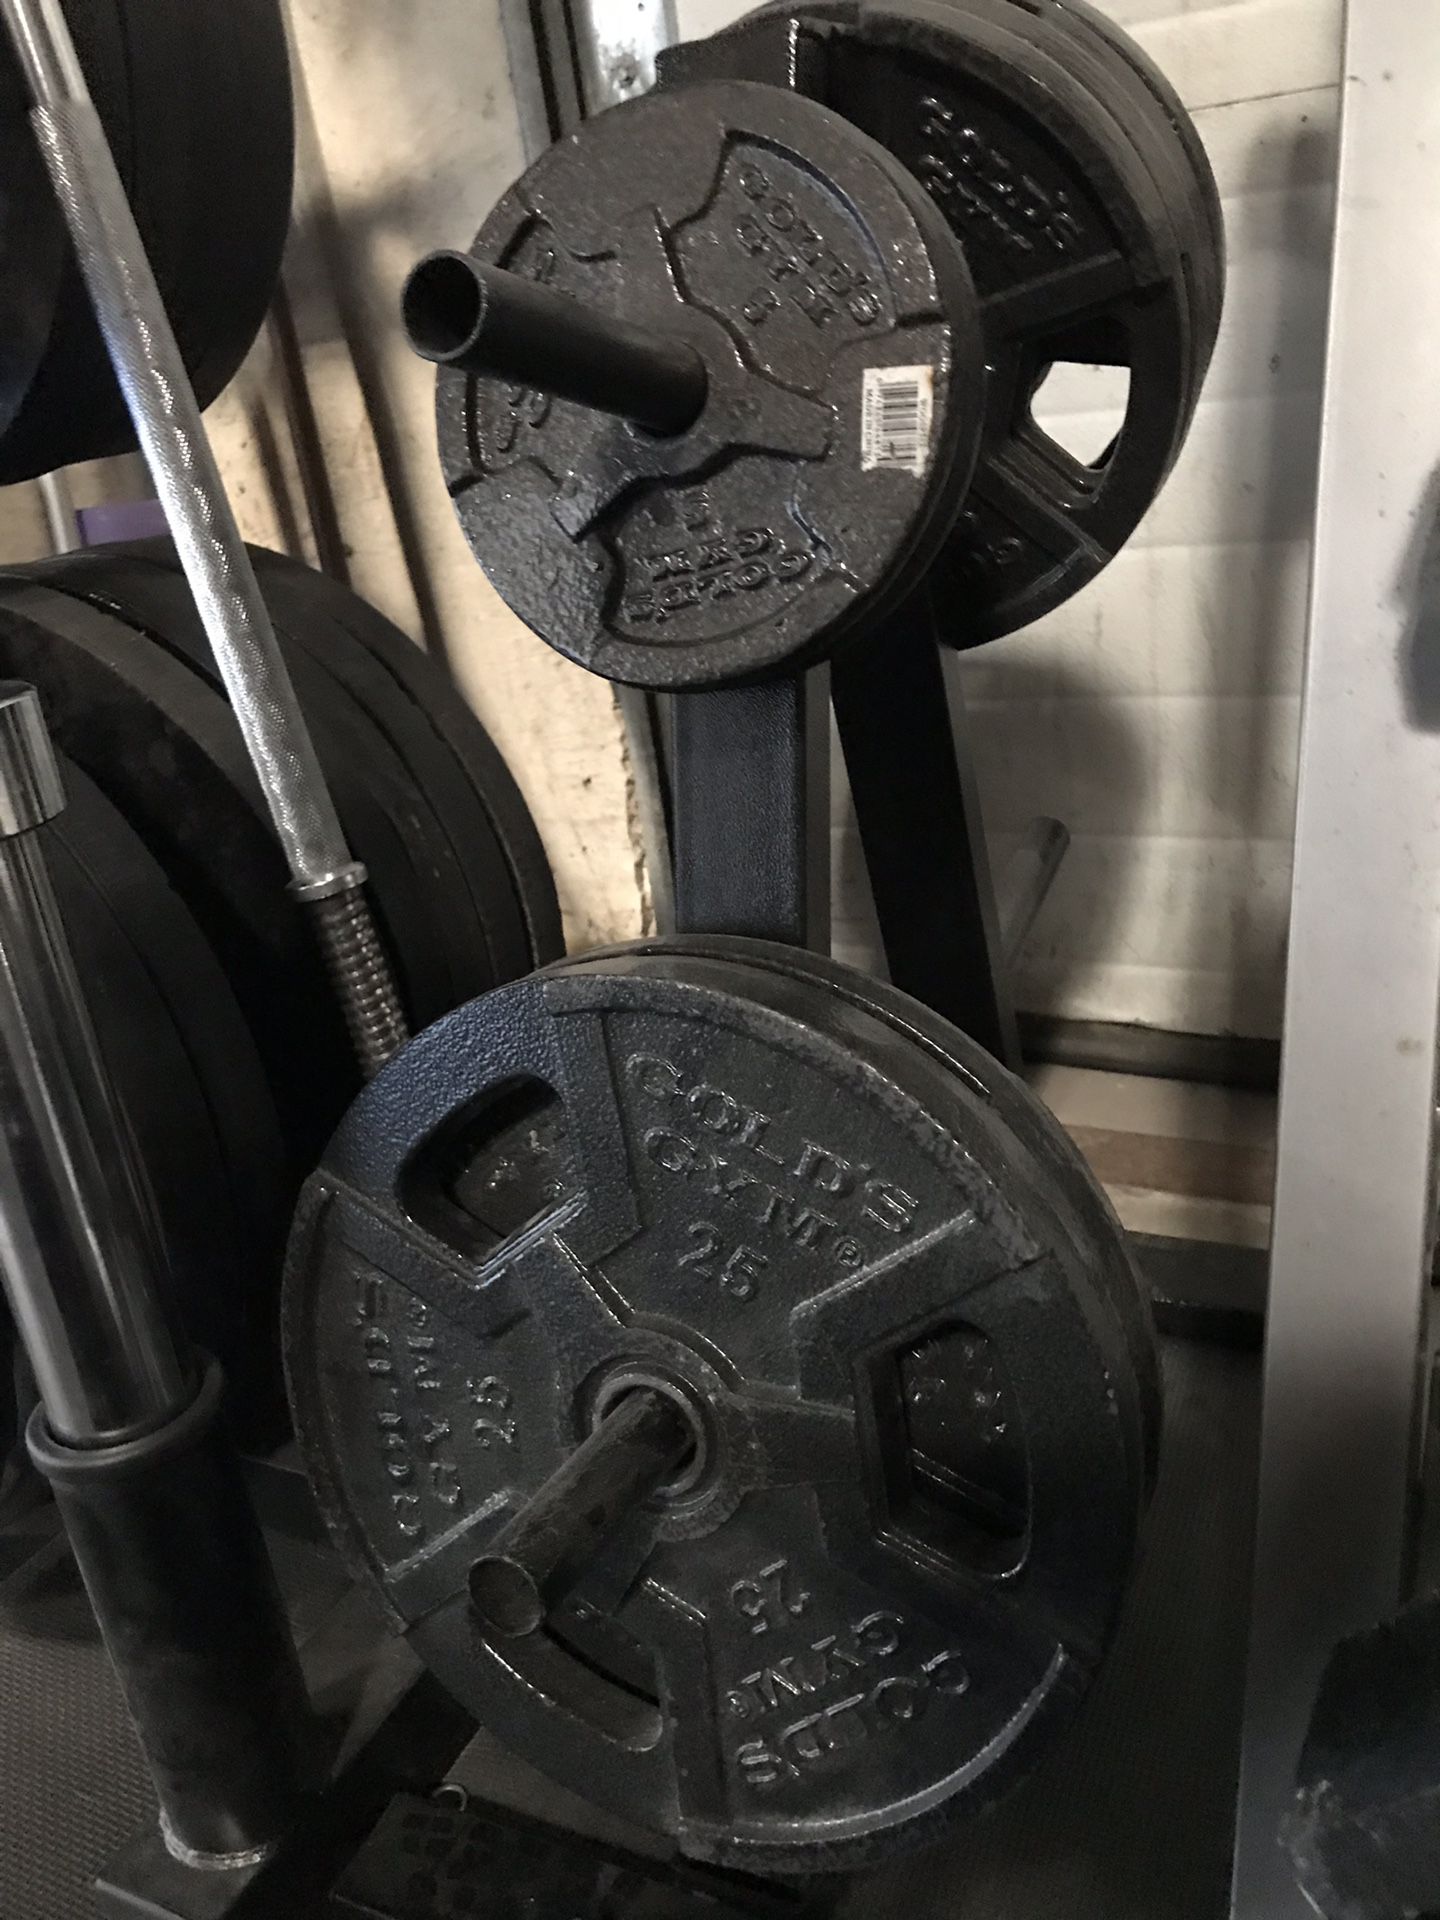 Curling bar and weights